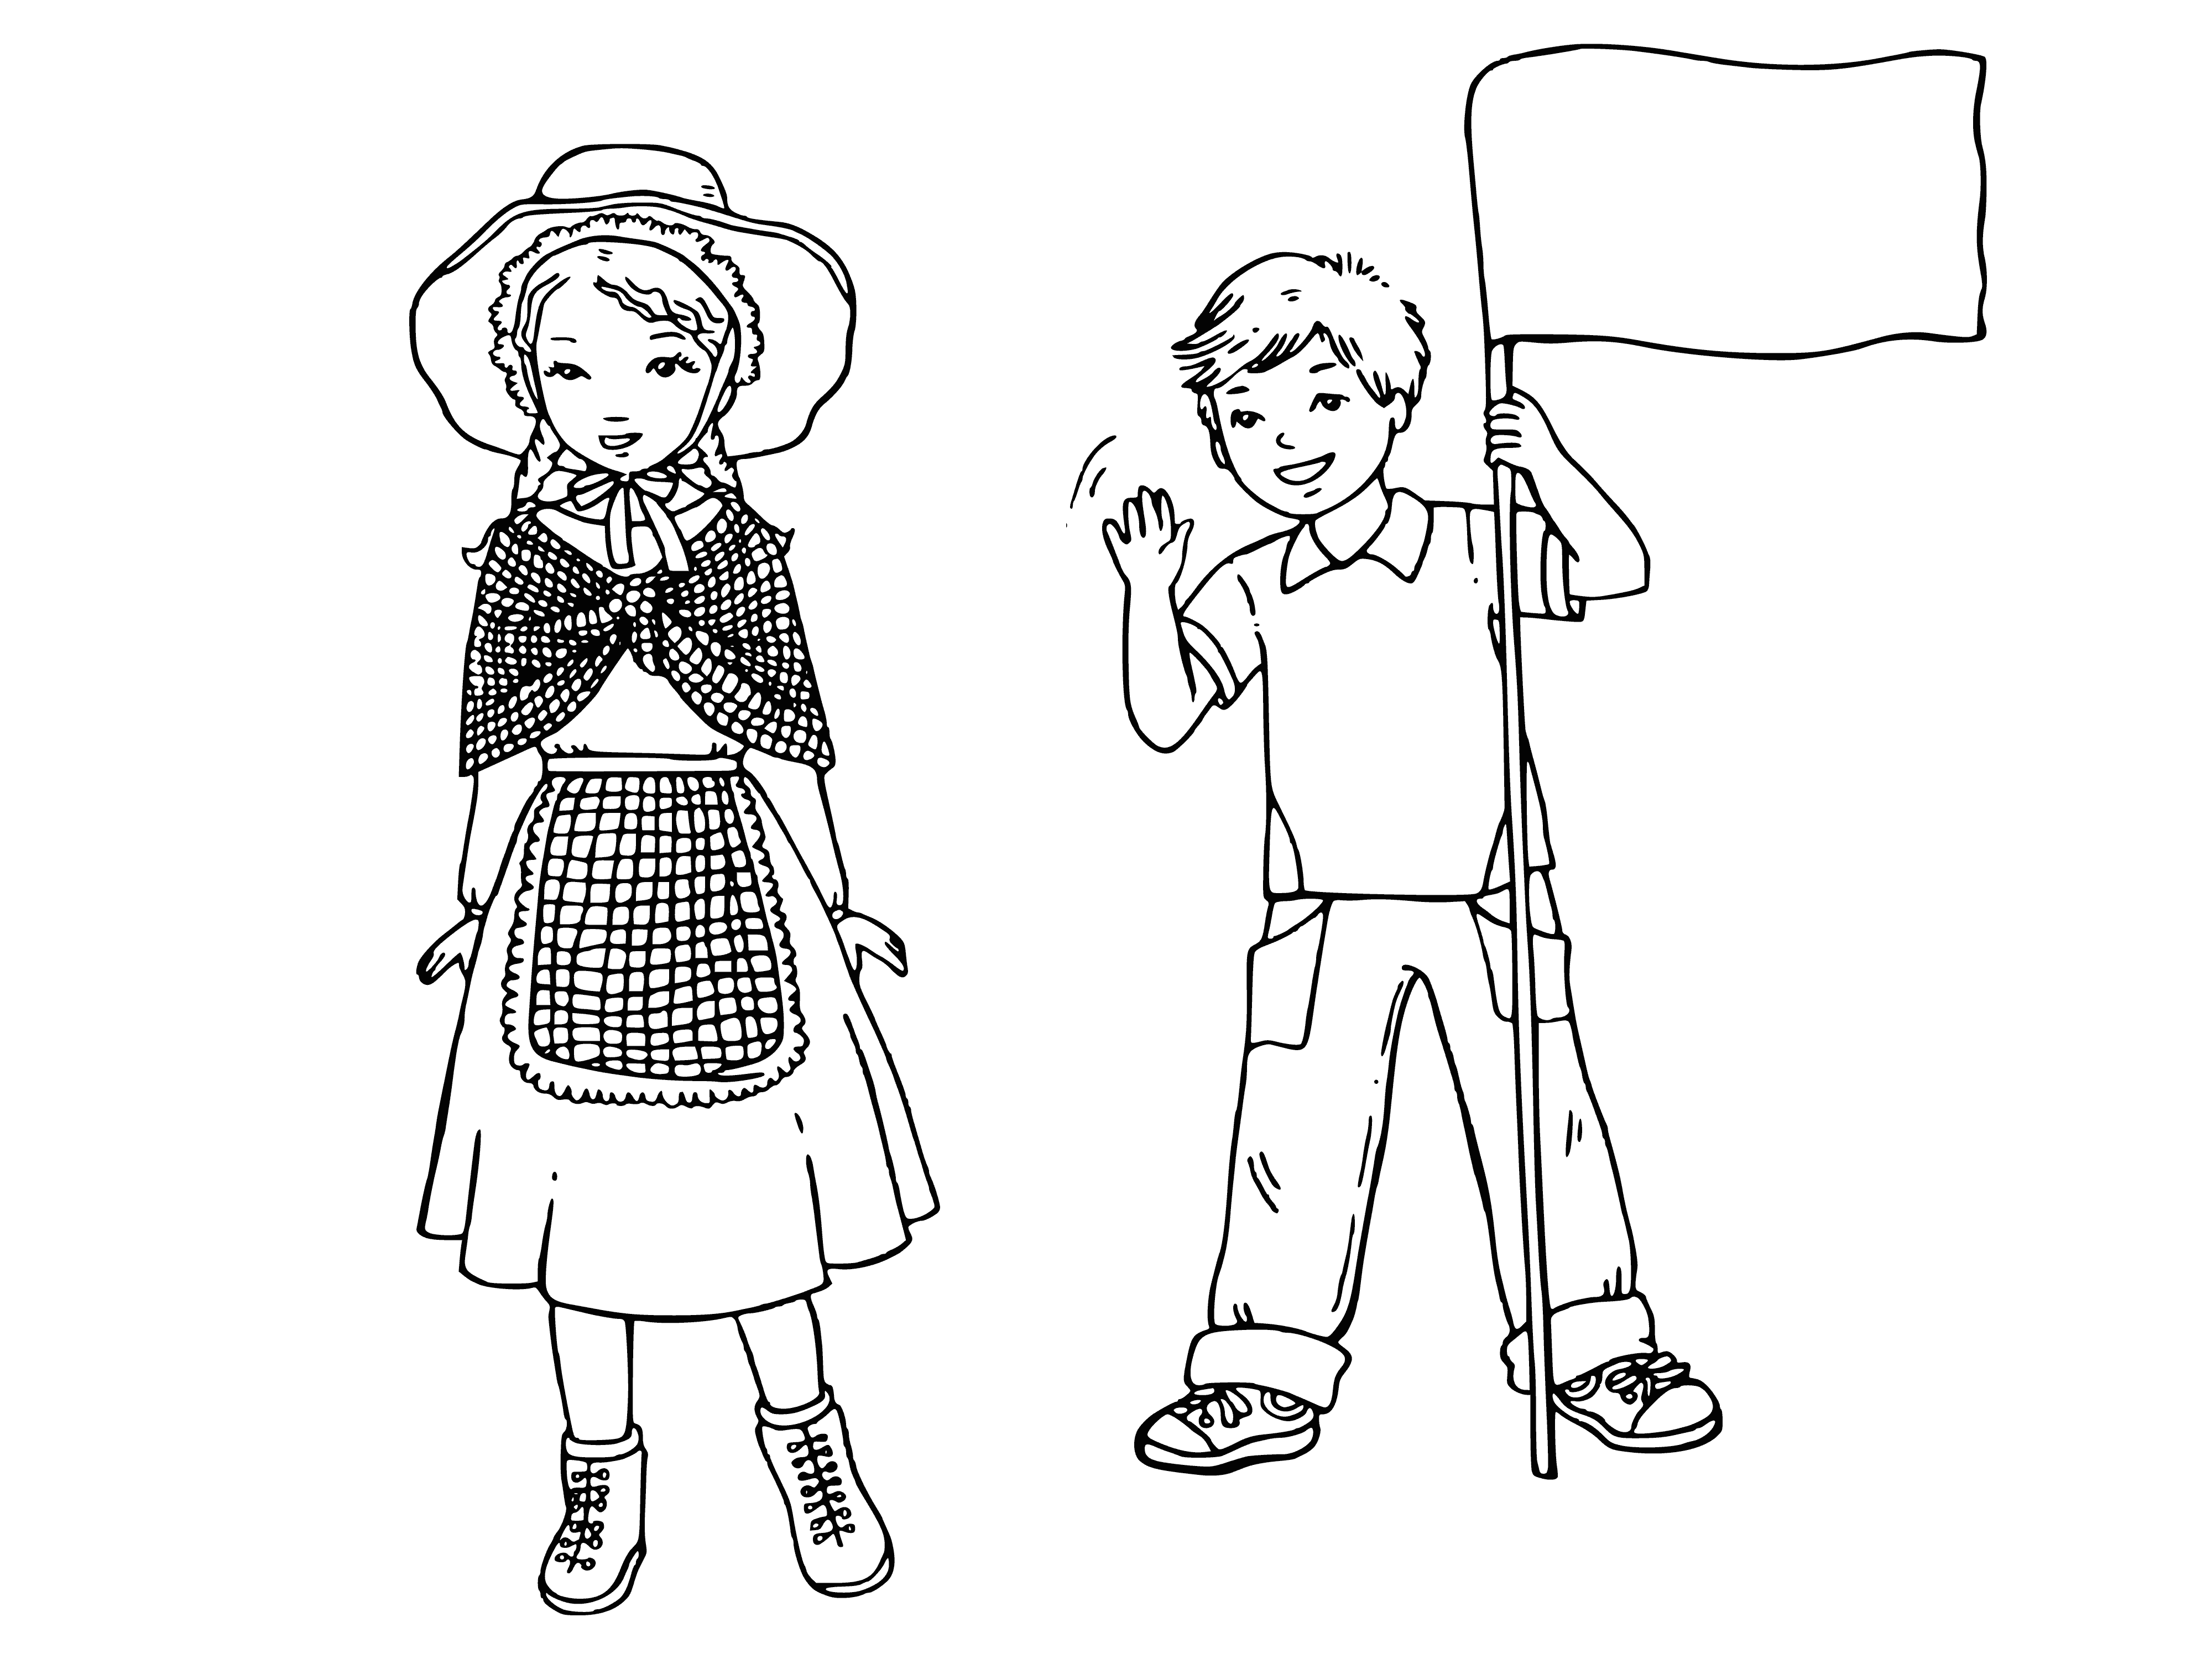 English children coloring page